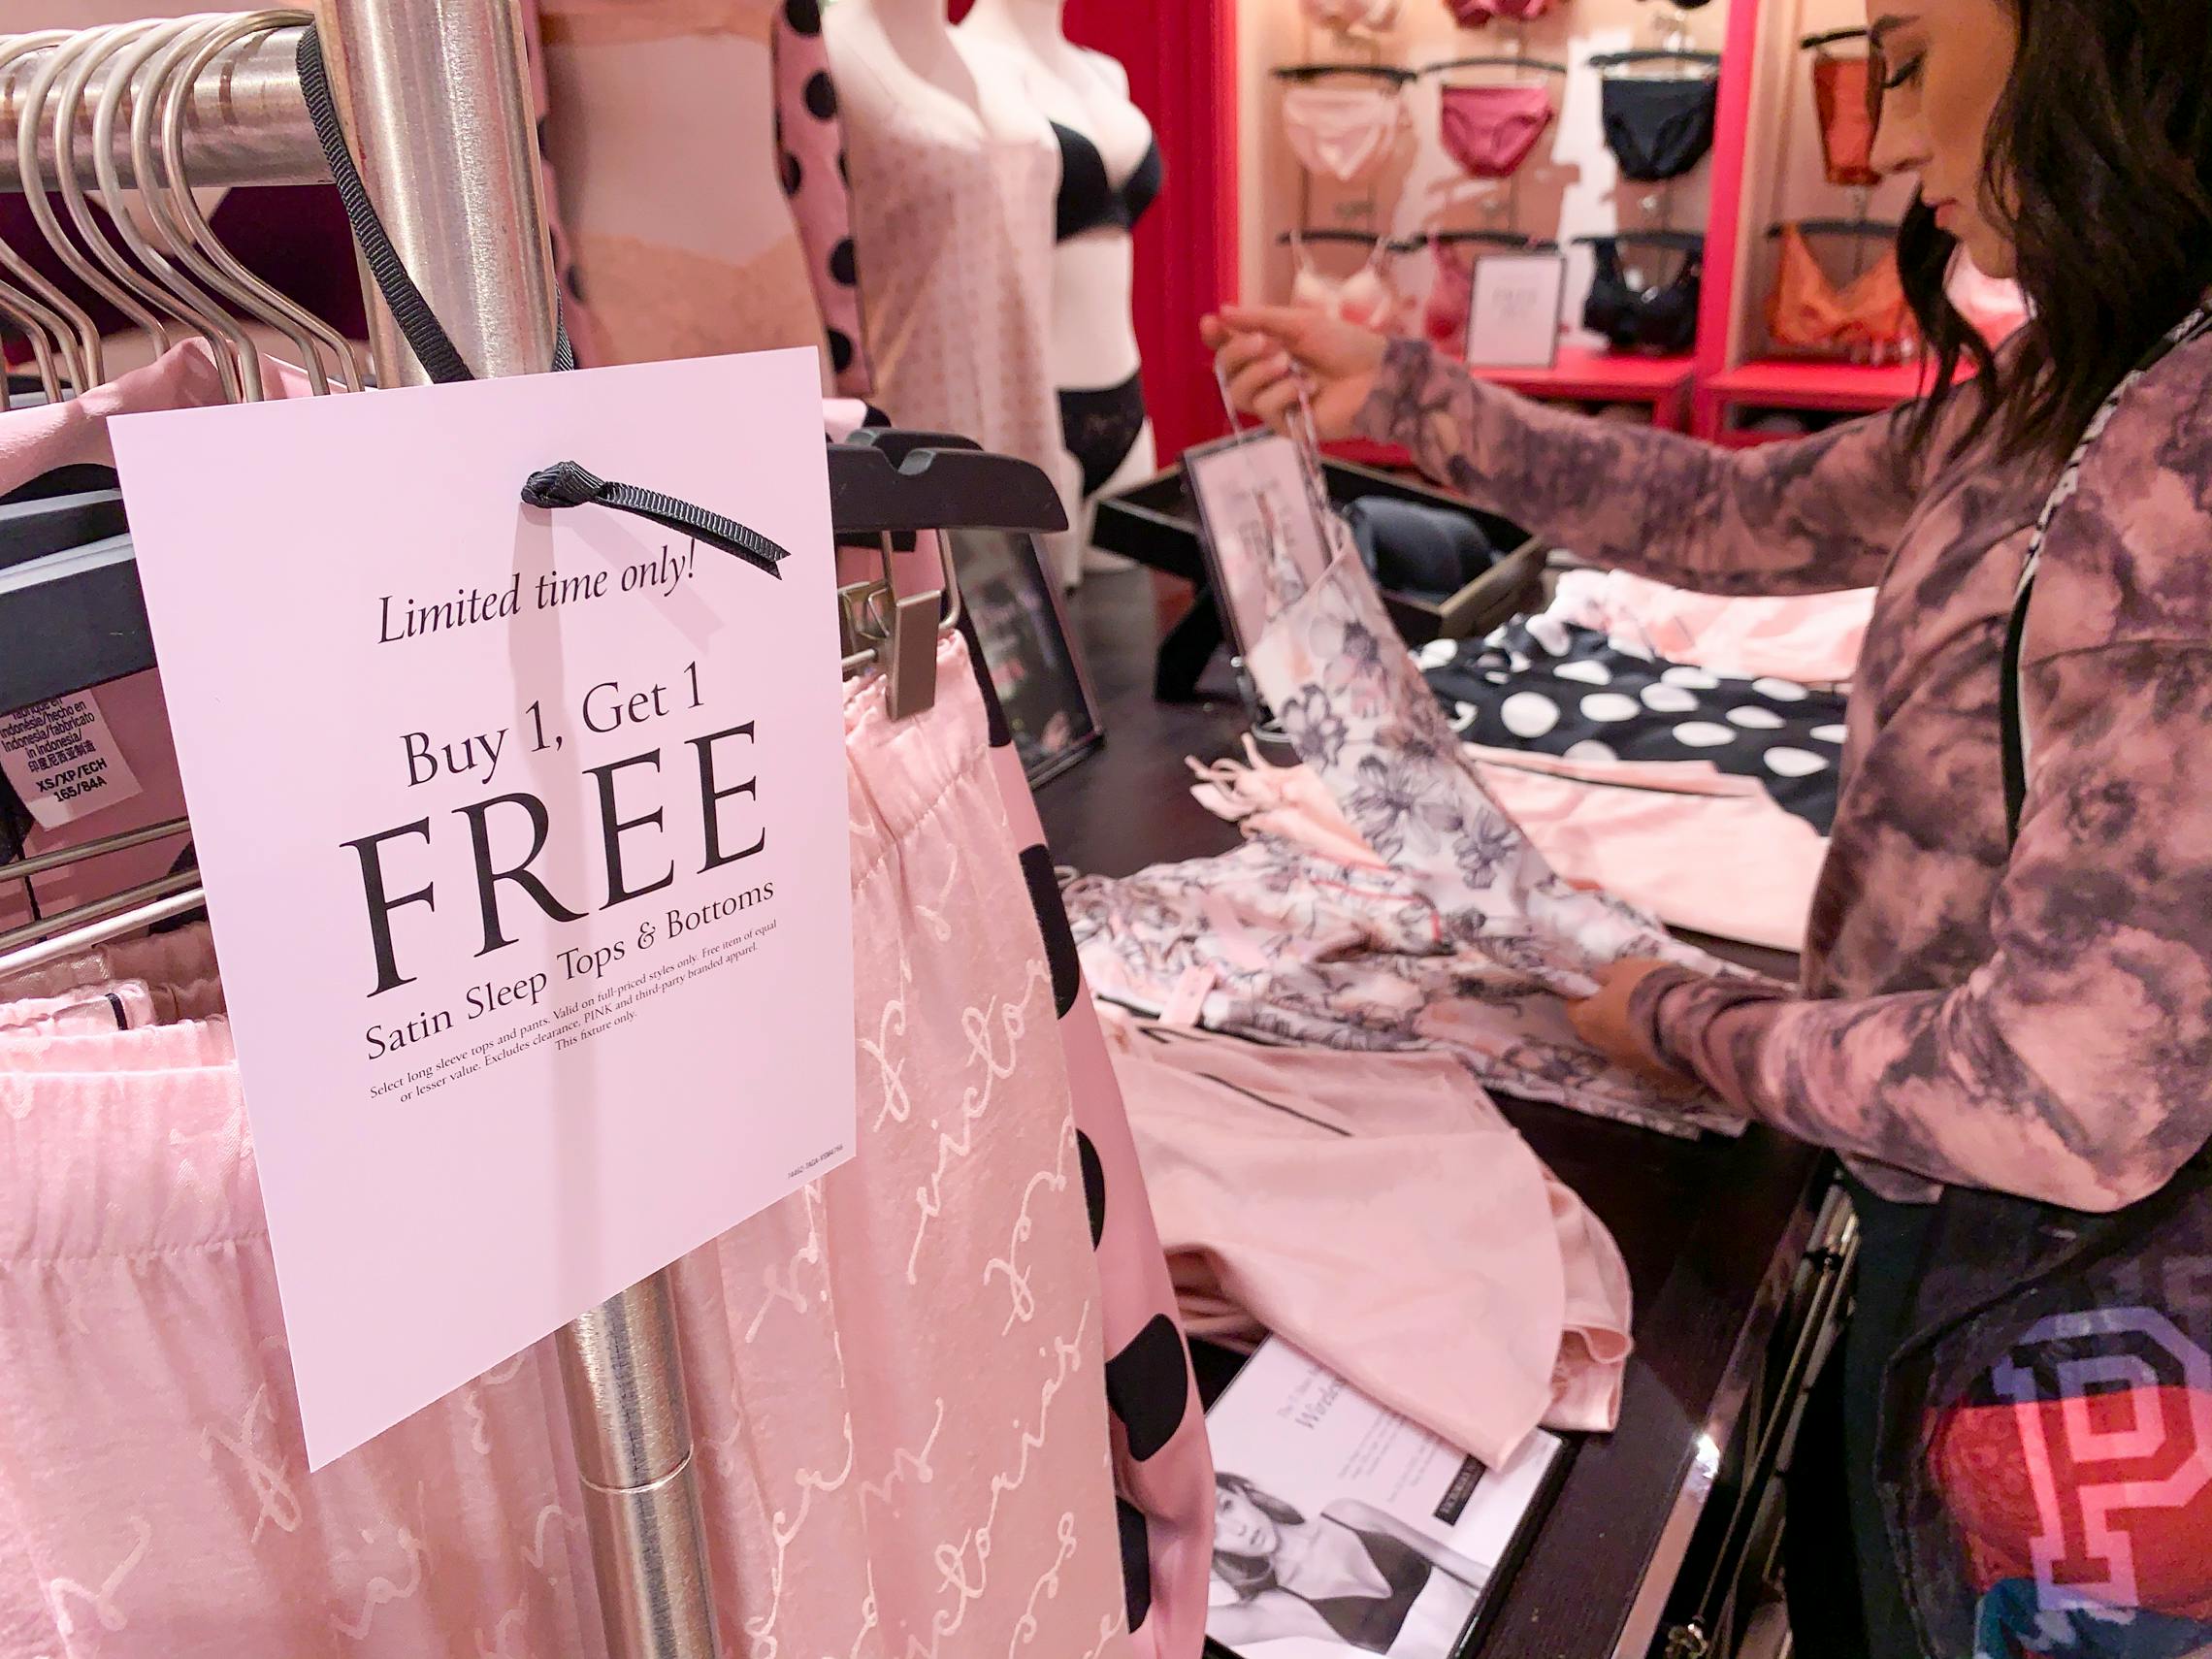 Woman looking at Stain pajamas in background of buy one get one free sign.